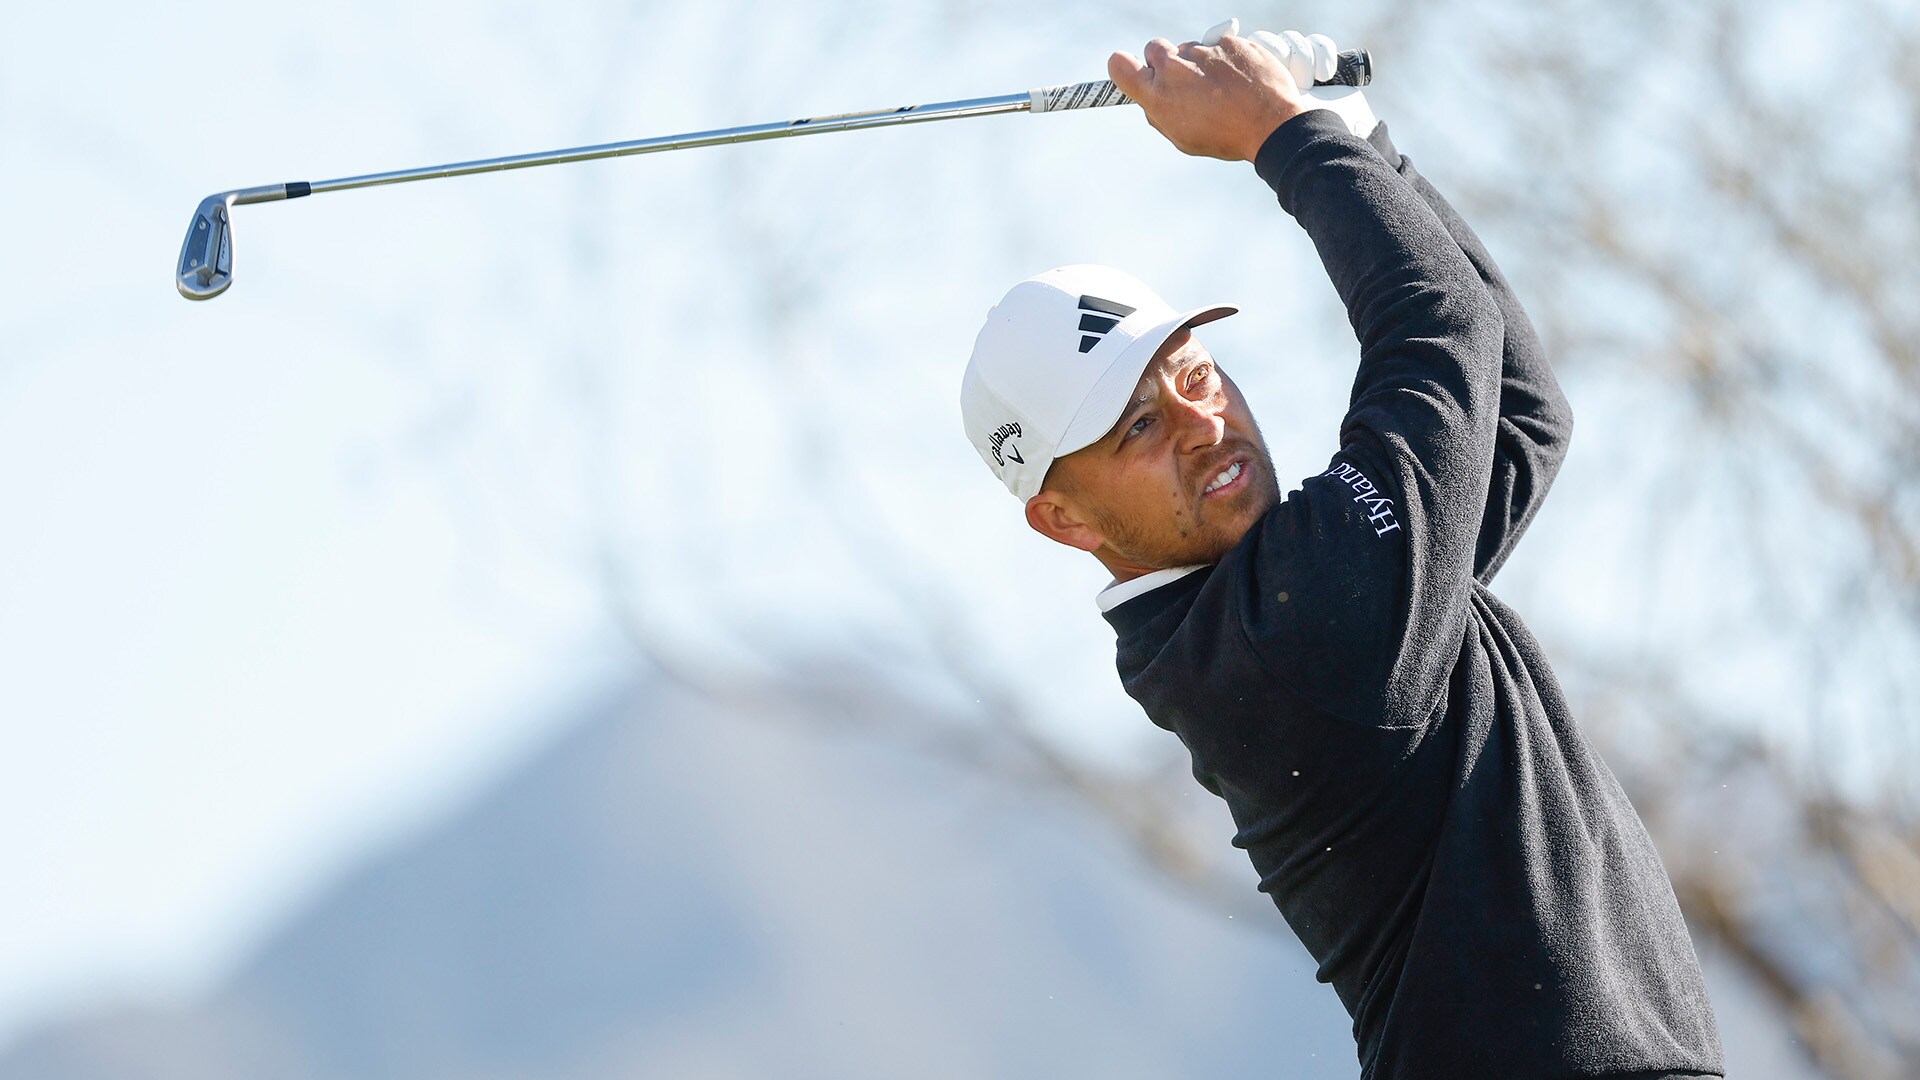 Xander Schauffele opens with a 4-under 67 in windy conditions at TPC Scottsdale